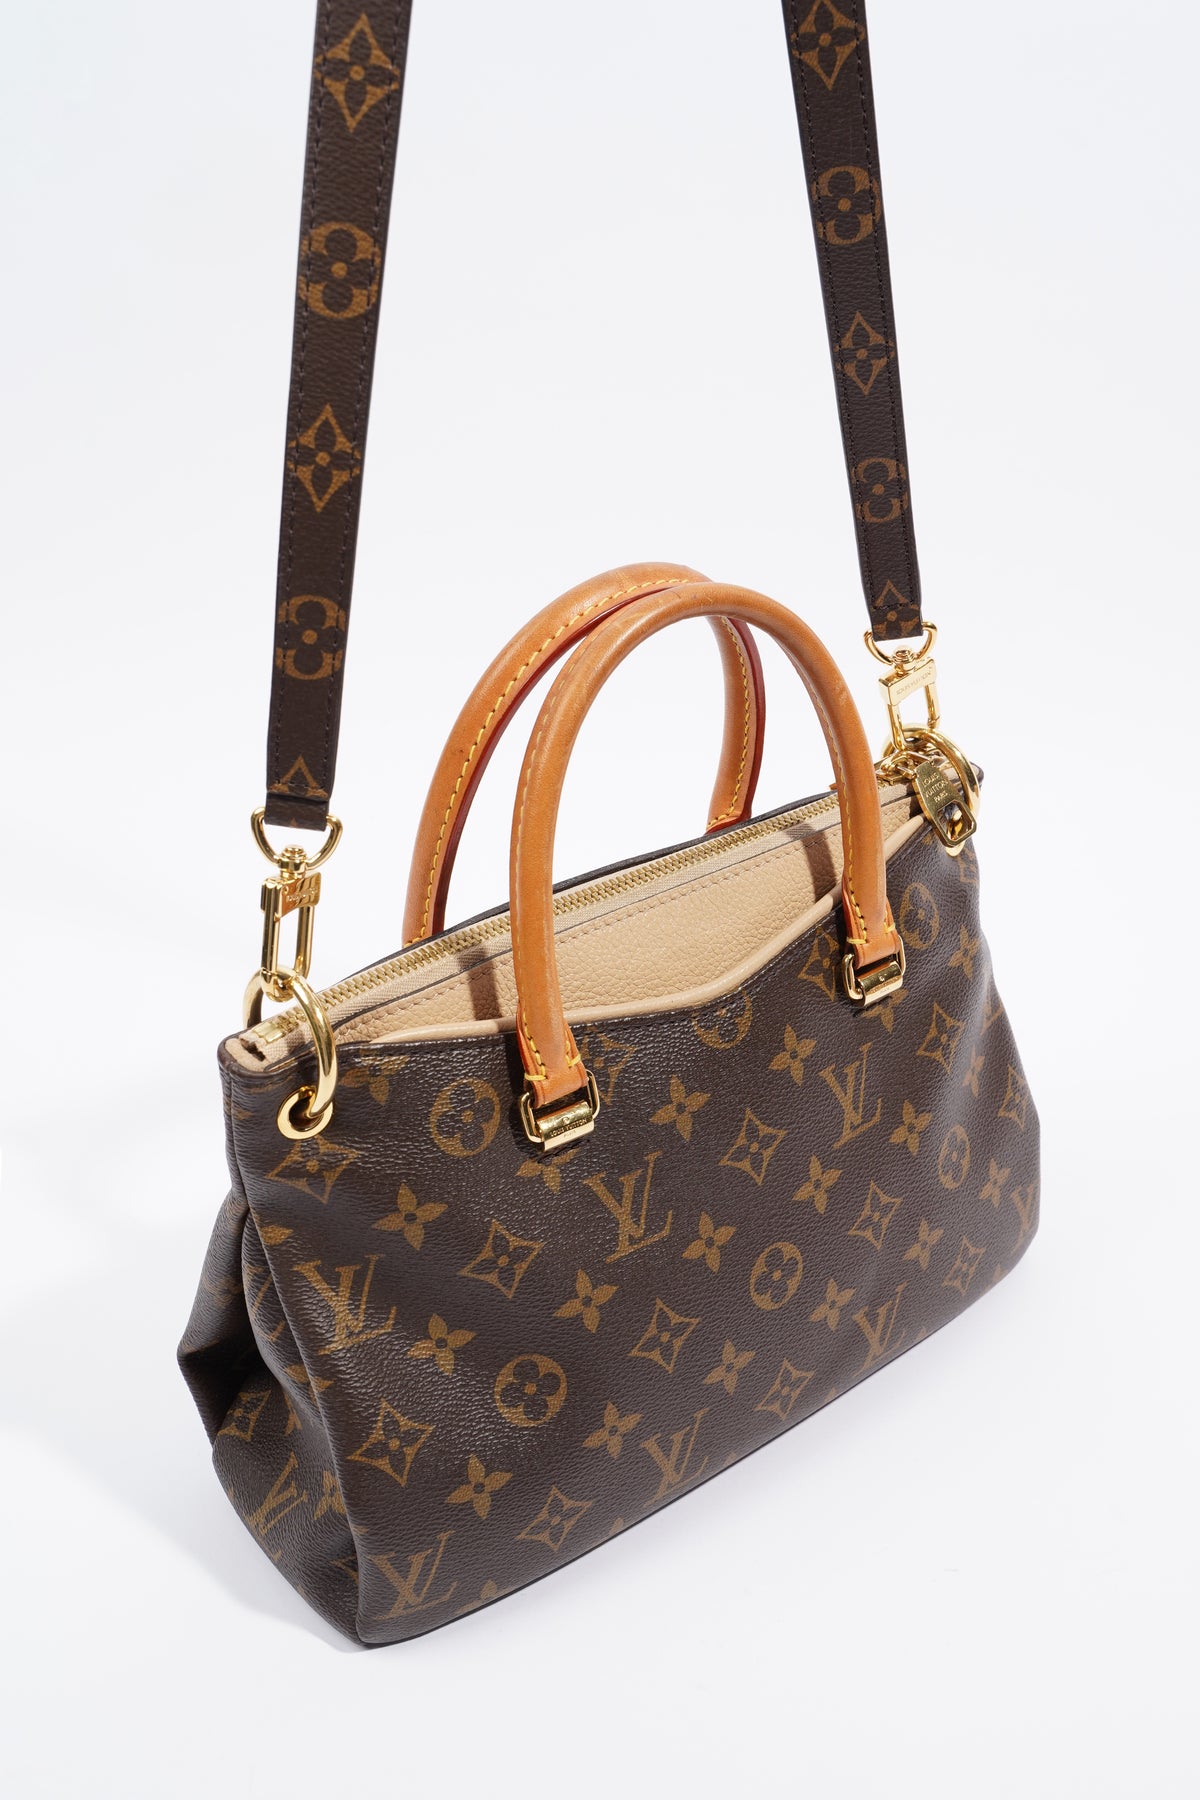 Louis Vuitton Pallas BB Dune, Monogram with Beige, Preowned in